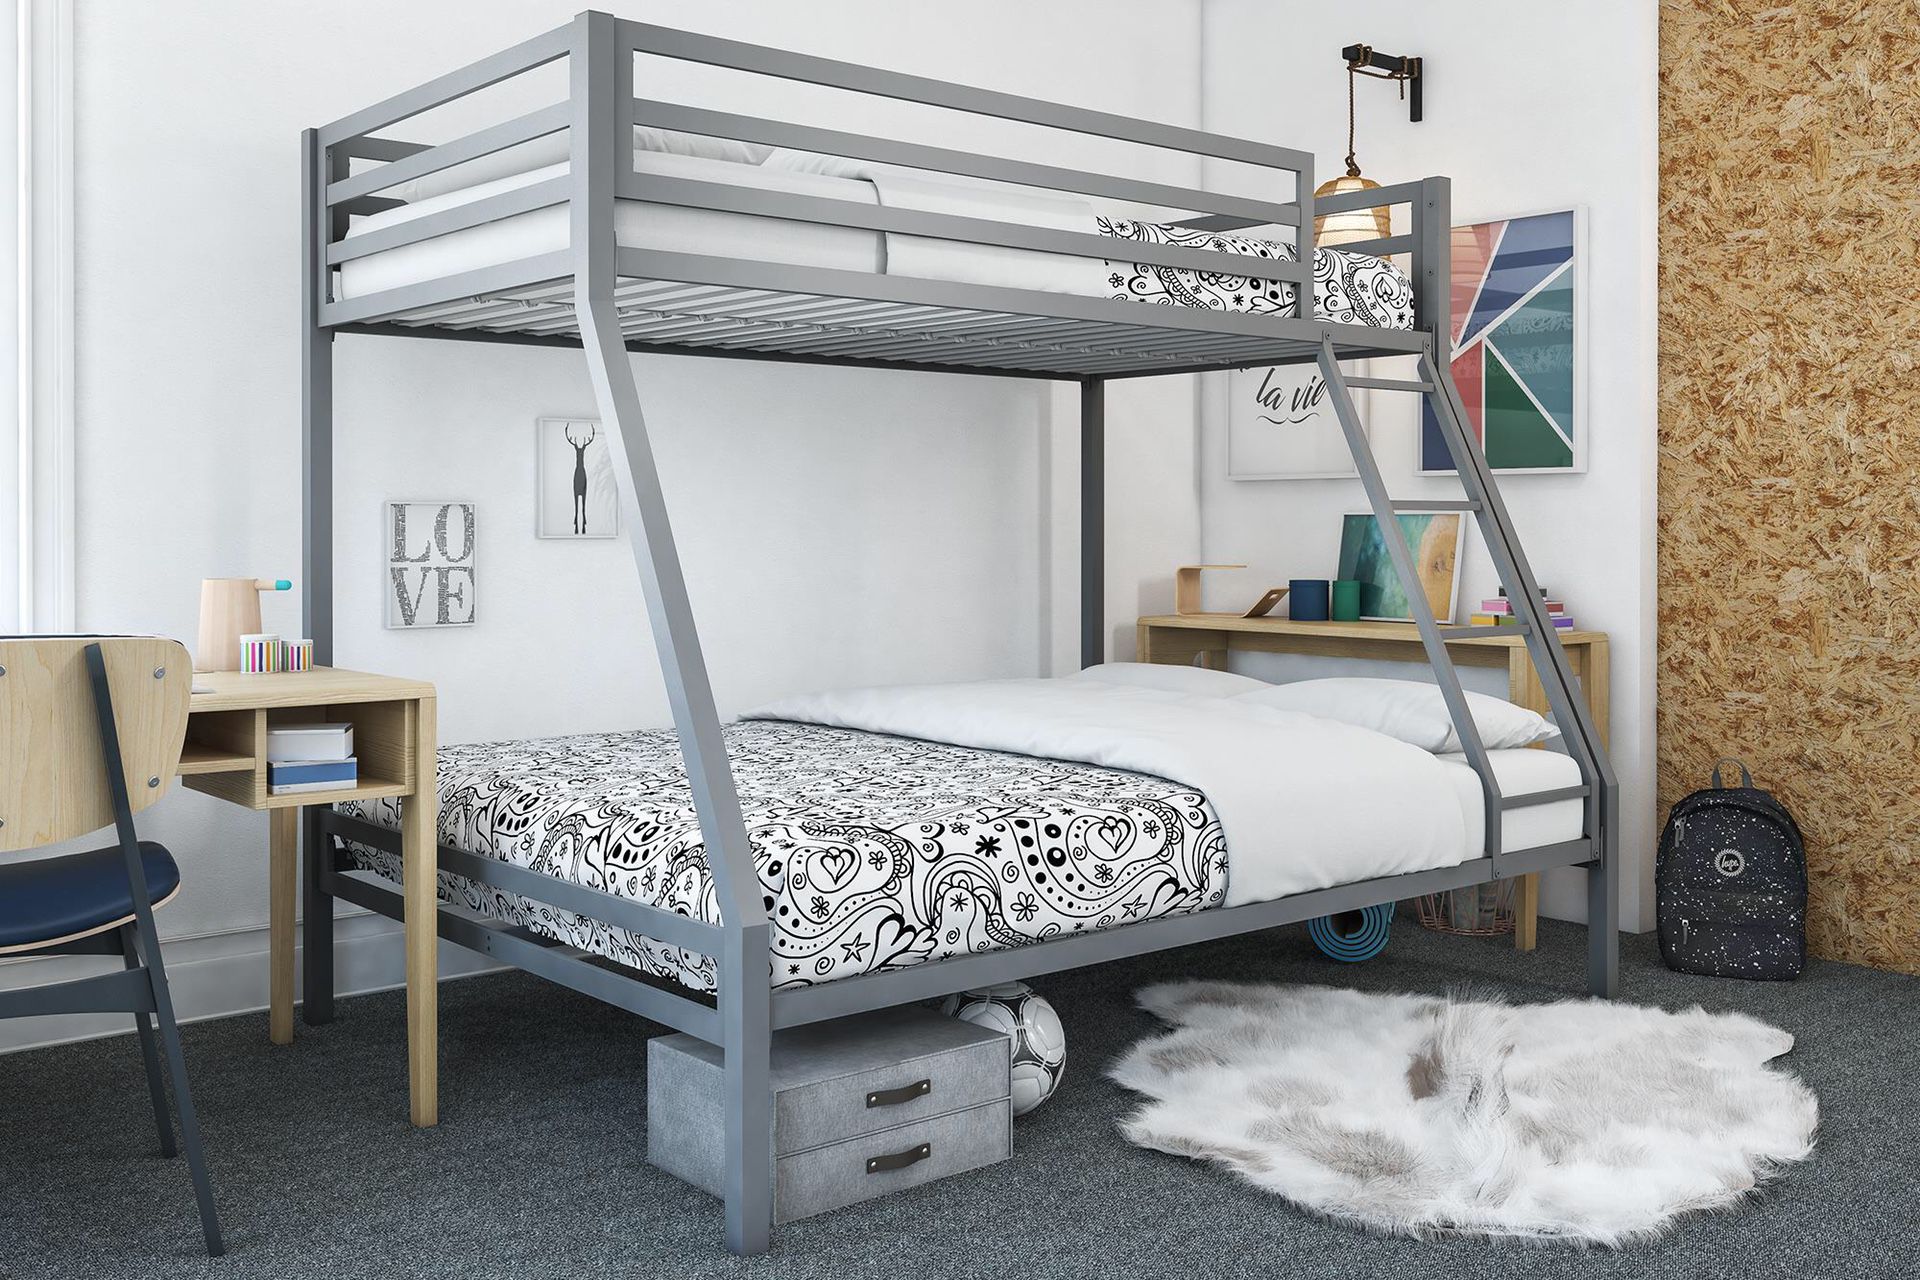 Bunk bed like new used for less than a month